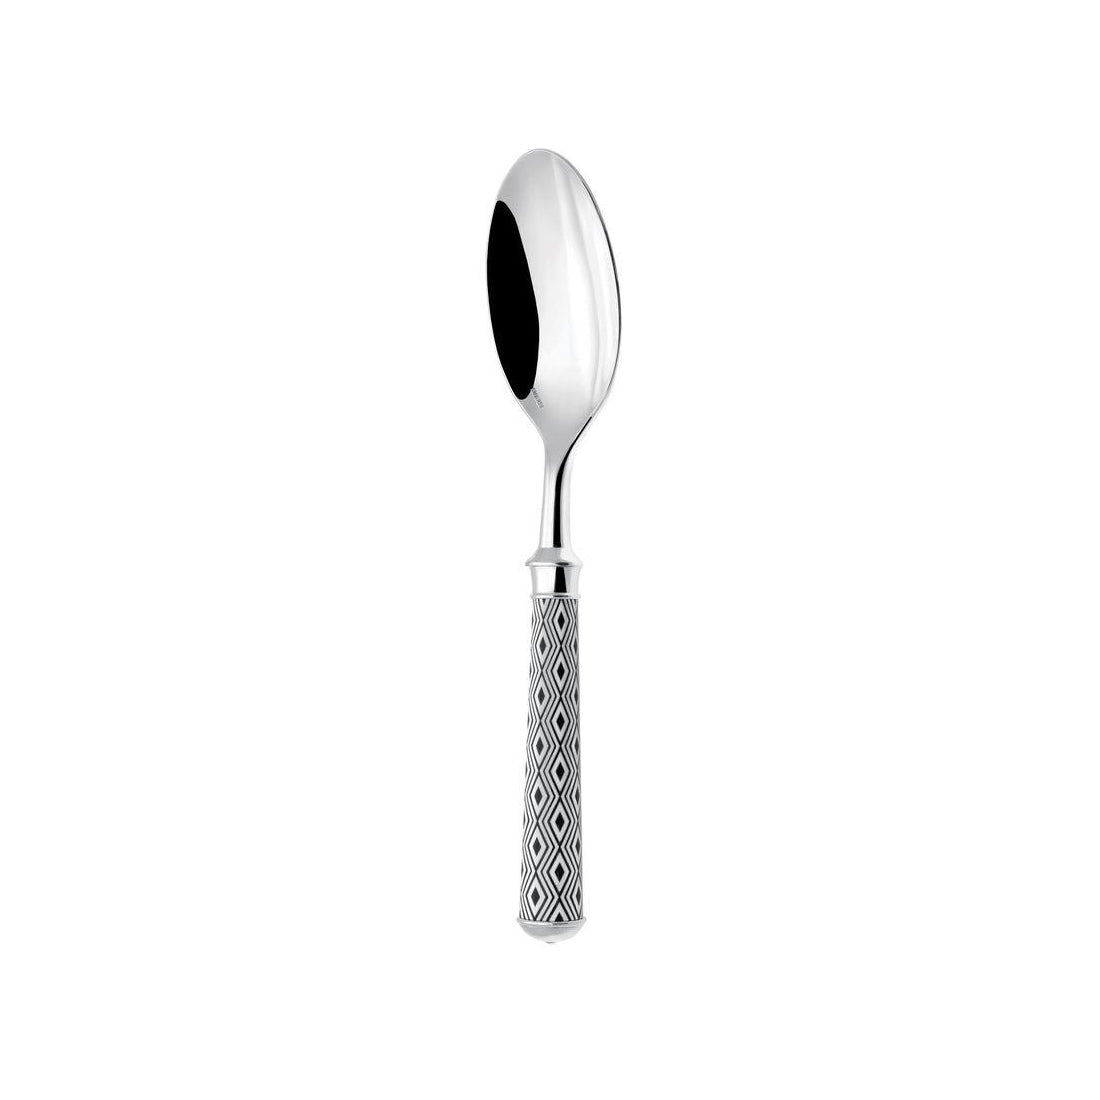 ERCUIS ARLEQUIN DINNER SPOON SILVER PLATED